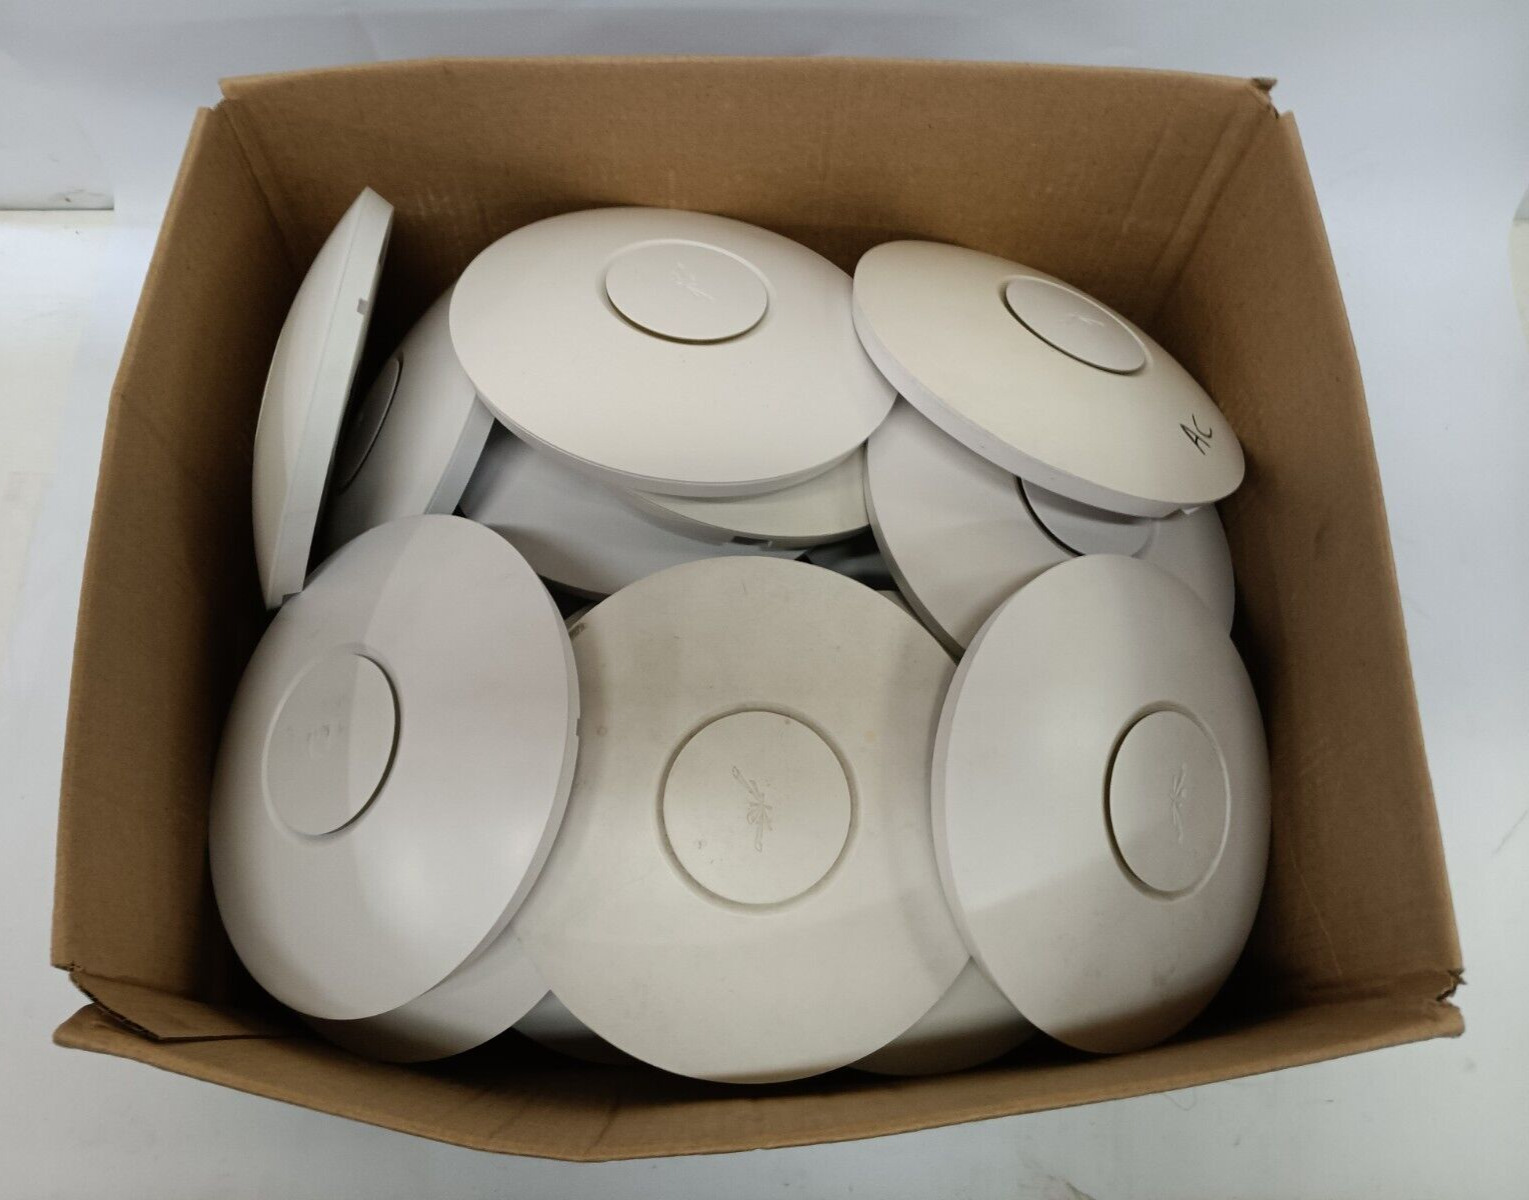 Lot of 26 Ubiquiti UniFi UAP-PRO Wireless Access Points 802.11 a/b/g/n Tested